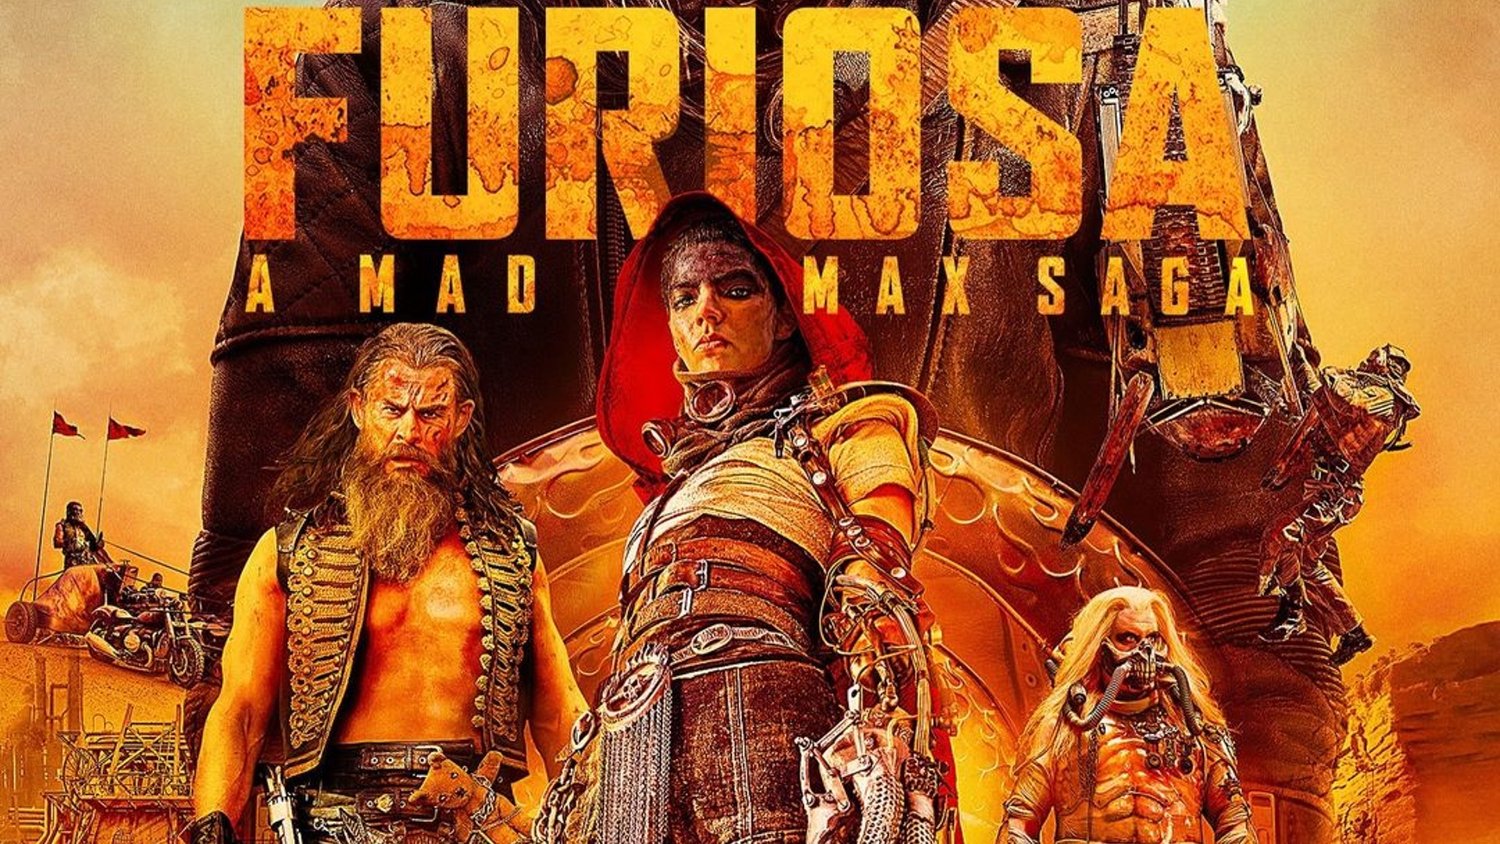 Furiosa Director Hints at Intensity of Action in Planned for Mad Max: The Wasteland